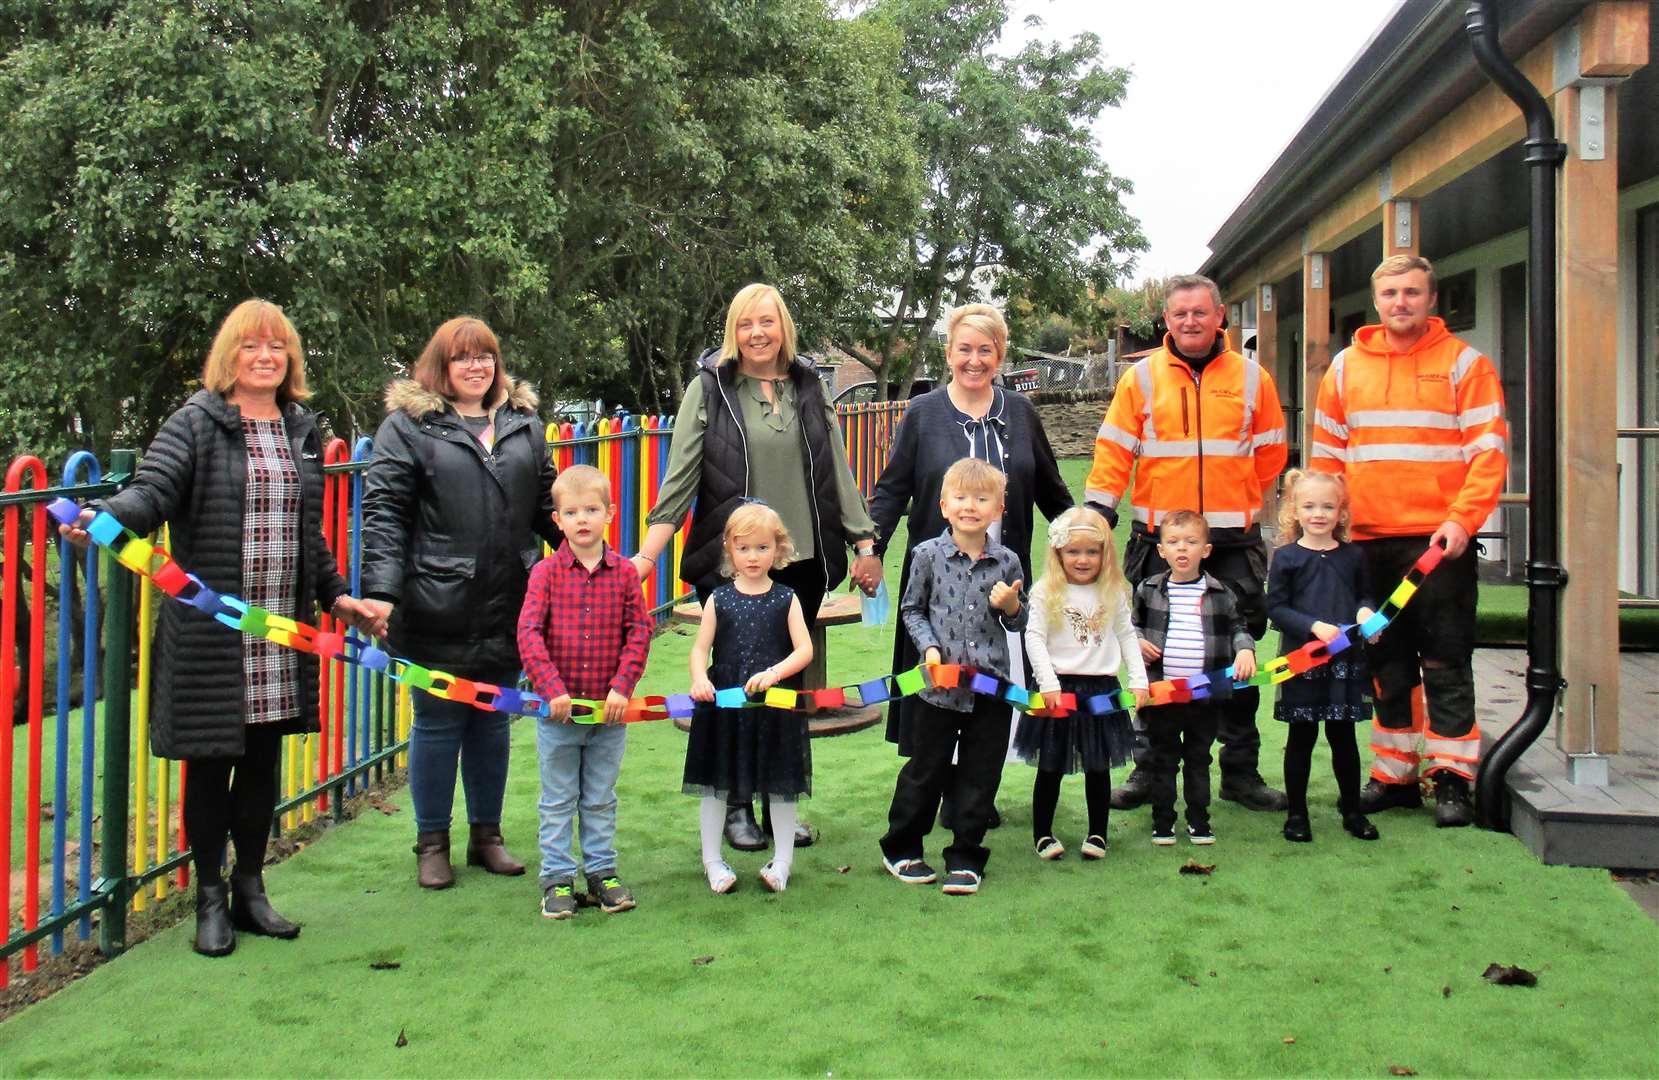 Early Learning Centre at Miller Academy official opening with, from left at rear, Susan Gerrard (parent council treasurer), Hayley Mackay (parent council chairperson), Liz MacKintosh (senior early years practitioner), Jacqui Budge (headteacher), Michael MacAllan and Logan Henderson (both from GMR Henderson). At front are some of the new settings learners who helped cut the specially made recycled rainbow ribbon to open their garden.